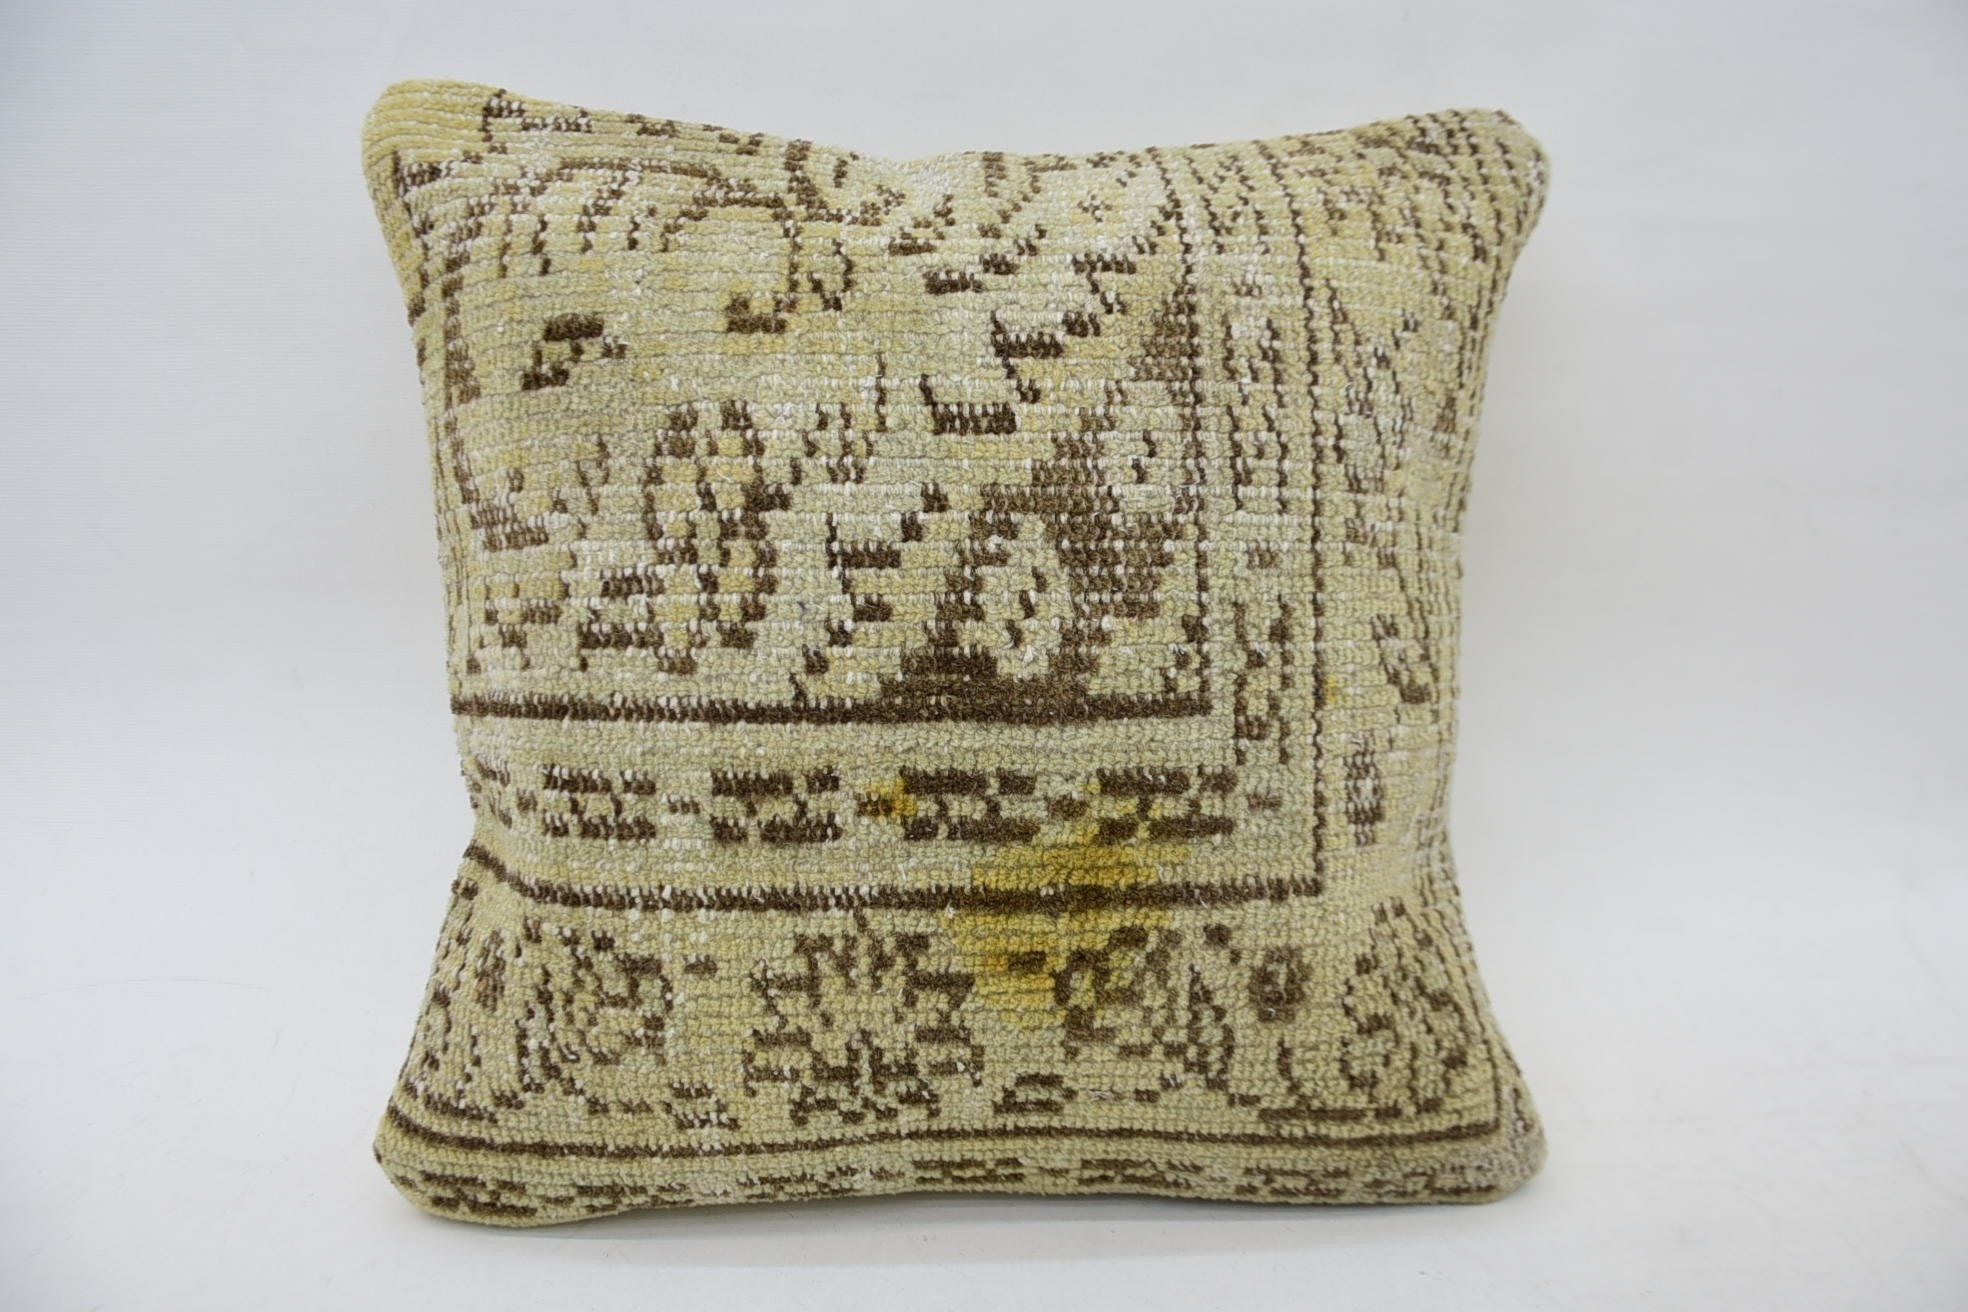 Authentic Pillow Cover, Handmade Kilim Cushion, 18"x18" Beige Pillow Cover, Vintage Kilim Pillow, Kilim Pillow Cover